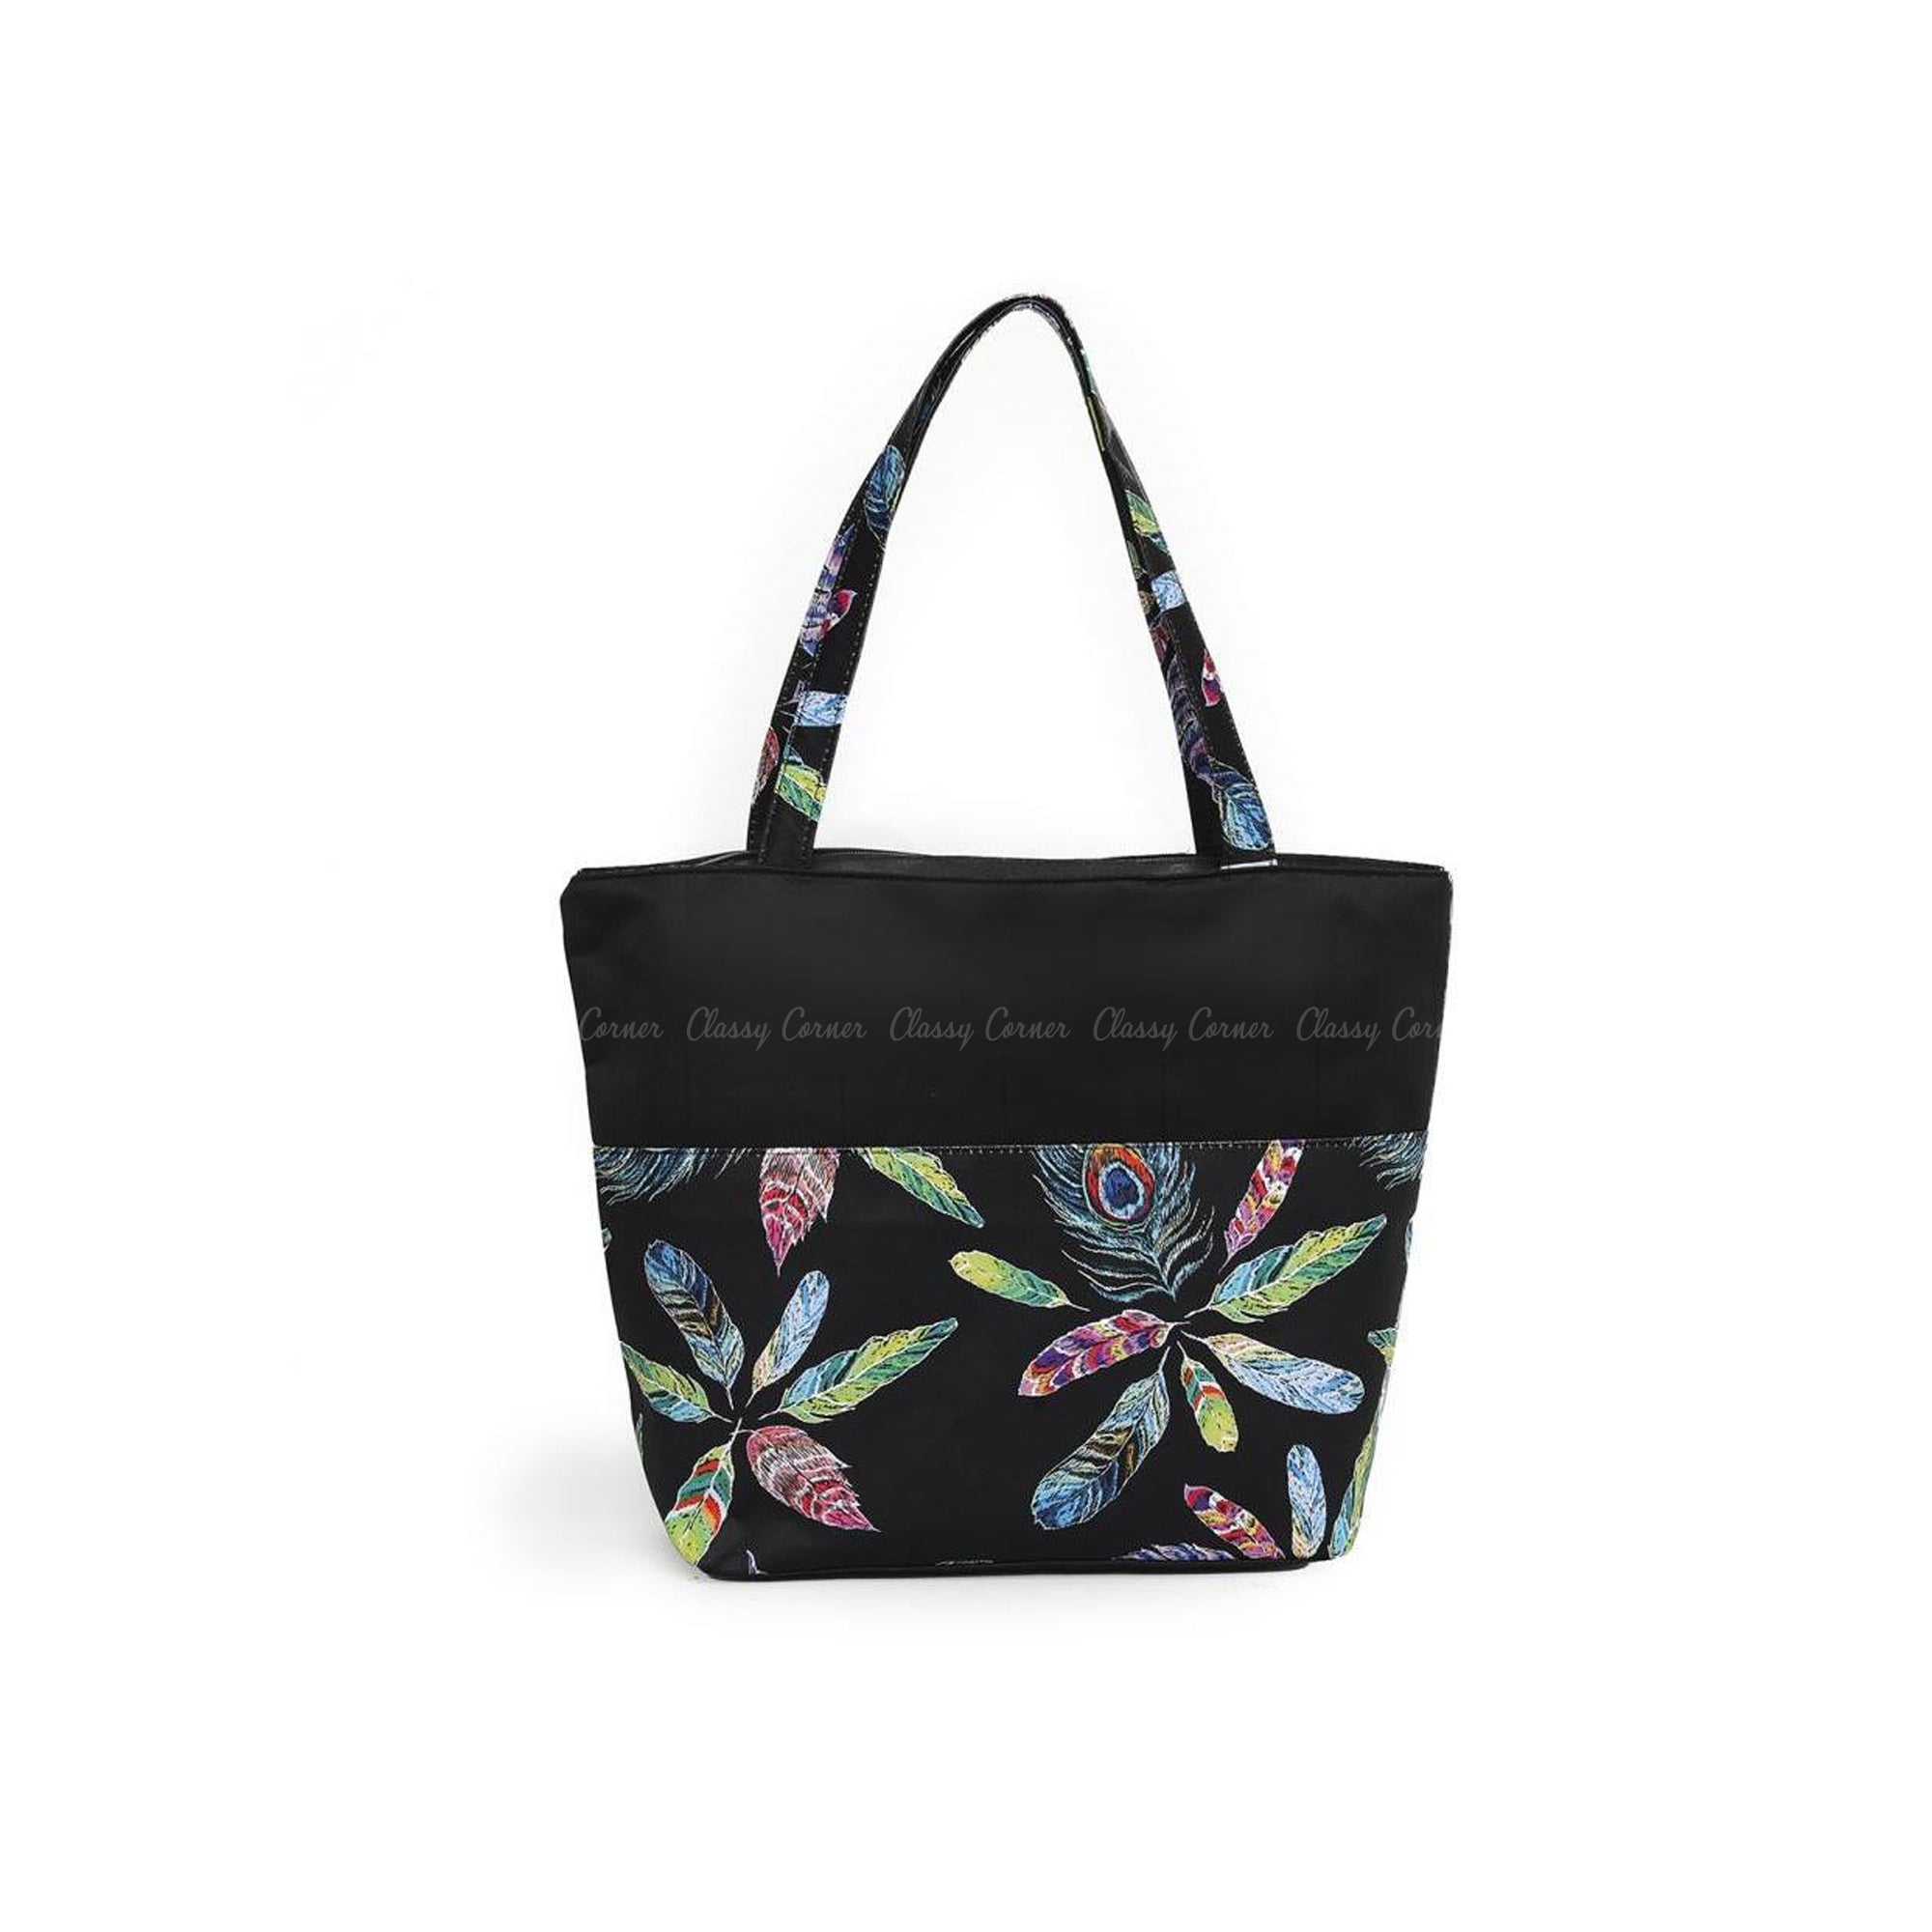 Multicolour Peacock Feathers Print with Zipper Black Beach Tote Bag